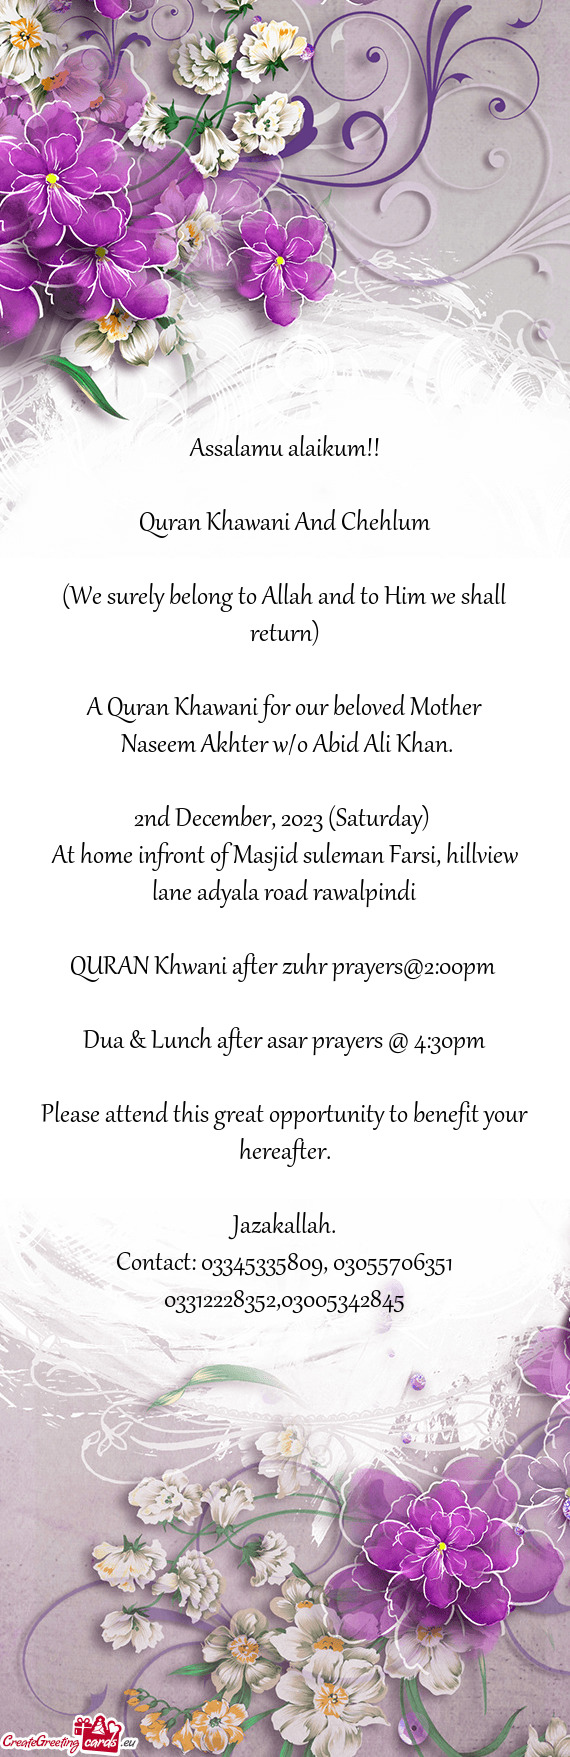 A Quran Khawani for our beloved Mother